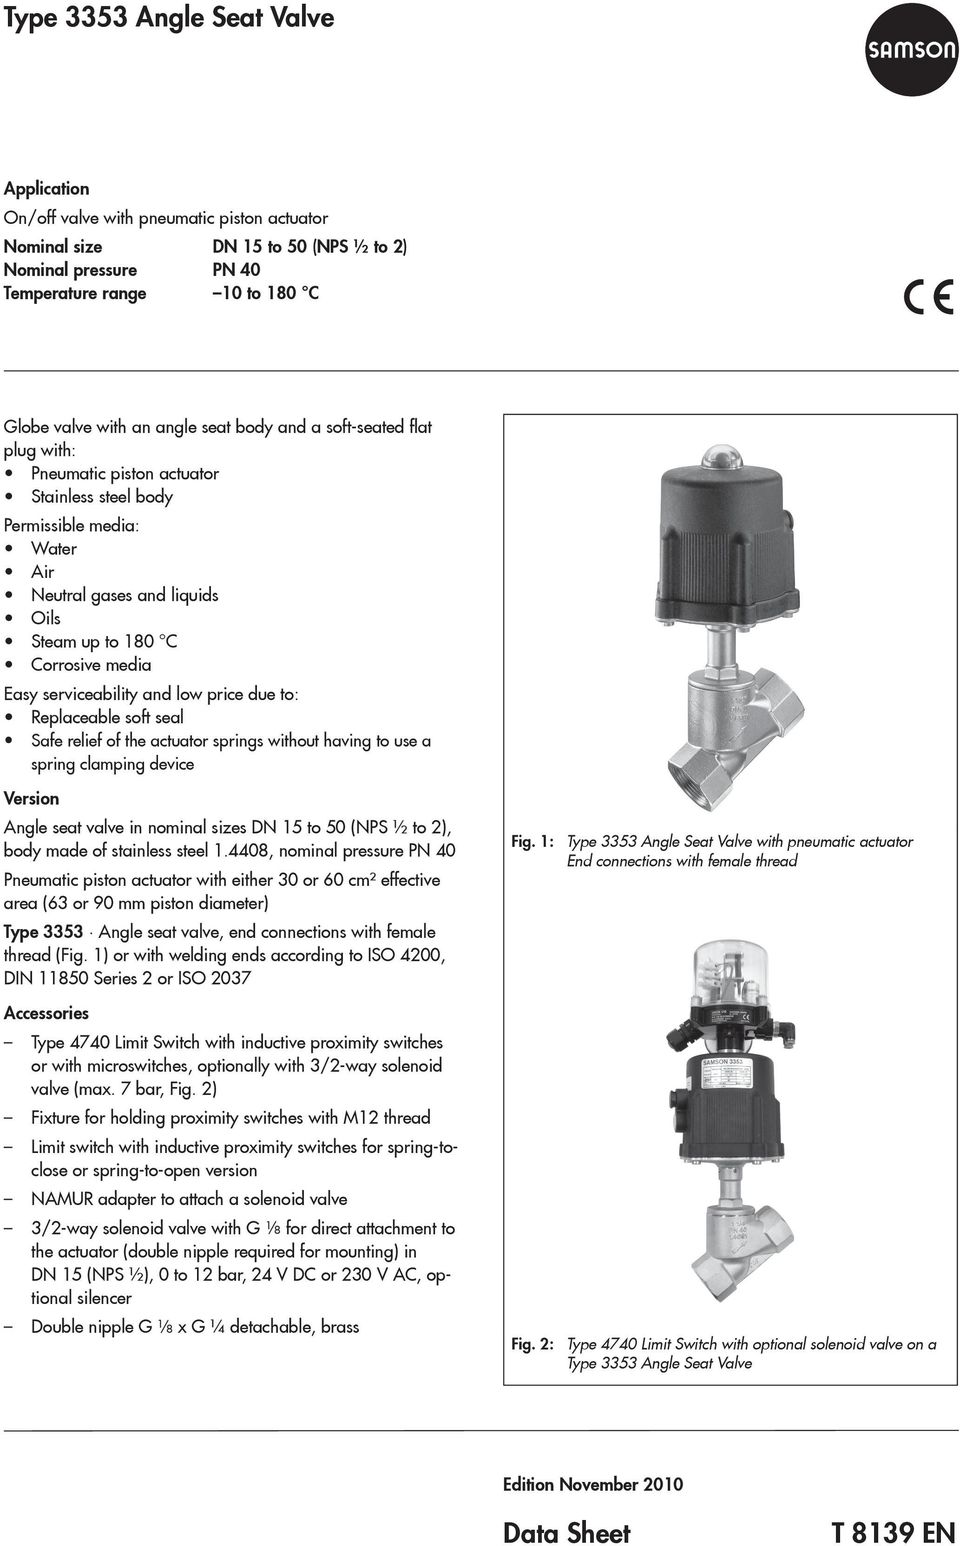 serviceability and low price due to: Replaceable soft seal Safe relief of the actuator springs without having to use a spring clamping device Version Angle seat valve in nominal sizes DN 15 to 50